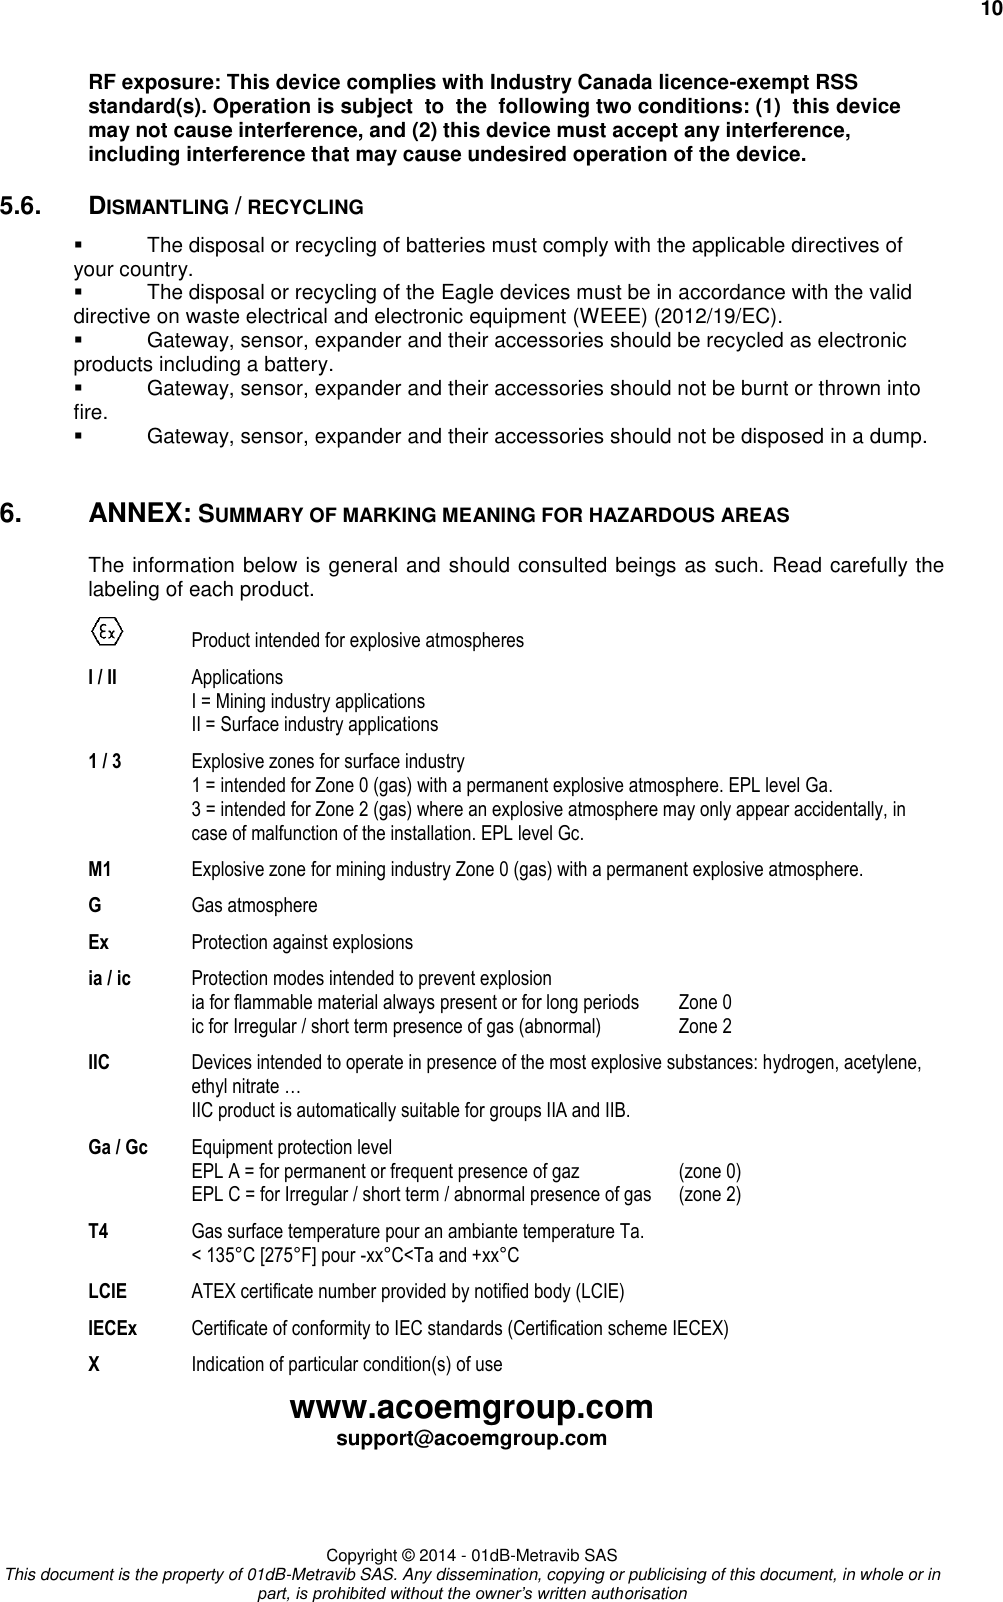     10 www.acoemgroup.com support@acoemgroup.com     Copyright © 2014 - 01dB-Metravib SAS This document is the property of 01dB-Metravib SAS. Any dissemination, copying or publicising of this document, in whole or in part, is prohibited without the owner’s written authorisation RF exposure: This device complies with Industry Canada licence-exempt RSS standard(s). Operation is subject  to  the  following two conditions: (1)  this device may not cause interference, and (2) this device must accept any interference, including interference that may cause undesired operation of the device. 5.6.  DISMANTLING / RECYCLING   The disposal or recycling of batteries must comply with the applicable directives of your country.   The disposal or recycling of the Eagle devices must be in accordance with the valid directive on waste electrical and electronic equipment (WEEE) (2012/19/EC).   Gateway, sensor, expander and their accessories should be recycled as electronic products including a battery.   Gateway, sensor, expander and their accessories should not be burnt or thrown into fire.   Gateway, sensor, expander and their accessories should not be disposed in a dump.  6.  ANNEX: SUMMARY OF MARKING MEANING FOR HAZARDOUS AREAS The information below is general and should consulted beings as such. Read carefully the labeling of each product.   Product intended for explosive atmospheres I / II  Applications I = Mining industry applications II = Surface industry applications 1 / 3  Explosive zones for surface industry 1 = intended for Zone 0 (gas) with a permanent explosive atmosphere. EPL level Ga. 3 = intended for Zone 2 (gas) where an explosive atmosphere may only appear accidentally, in case of malfunction of the installation. EPL level Gc. M1  Explosive zone for mining industry Zone 0 (gas) with a permanent explosive atmosphere. G  Gas atmosphere Ex  Protection against explosions  ia / ic Protection modes intended to prevent explosion ia for flammable material always present or for long periods  Zone 0 ic for Irregular / short term presence of gas (abnormal)  Zone 2 IIC  Devices intended to operate in presence of the most explosive substances: hydrogen, acetylene, ethyl nitrate … IIC product is automatically suitable for groups IIA and IIB. Ga / Gc Equipment protection level EPL A = for permanent or frequent presence of gaz  (zone 0) EPL C = for Irregular / short term / abnormal presence of gas  (zone 2) T4  Gas surface temperature pour an ambiante temperature Ta. &lt; 135°C [275°F] pour -xx°C&lt;Ta and +xx°C  LCIE  ATEX certificate number provided by notified body (LCIE) IECEx  Certificate of conformity to IEC standards (Certification scheme IECEX) X  Indication of particular condition(s) of use